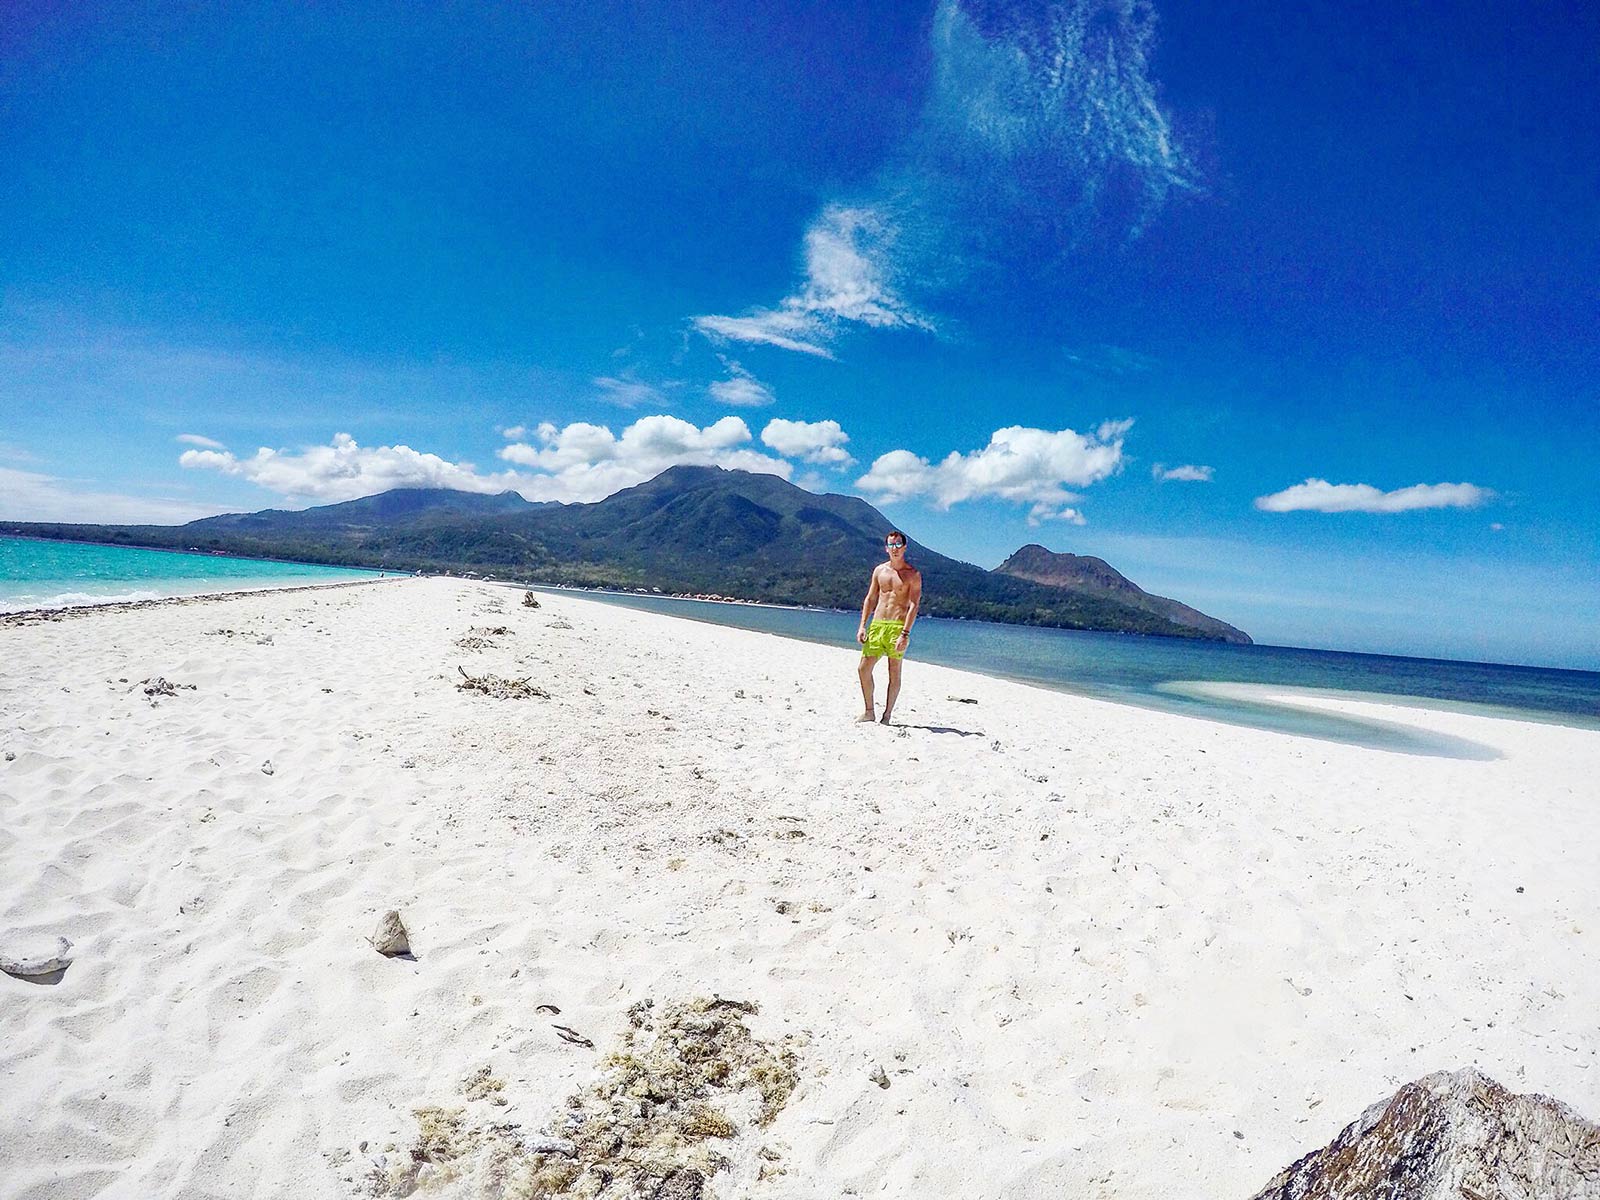 David Simpson on the beach at White Island in Camiguin, Philippines. White Island on Camiguin